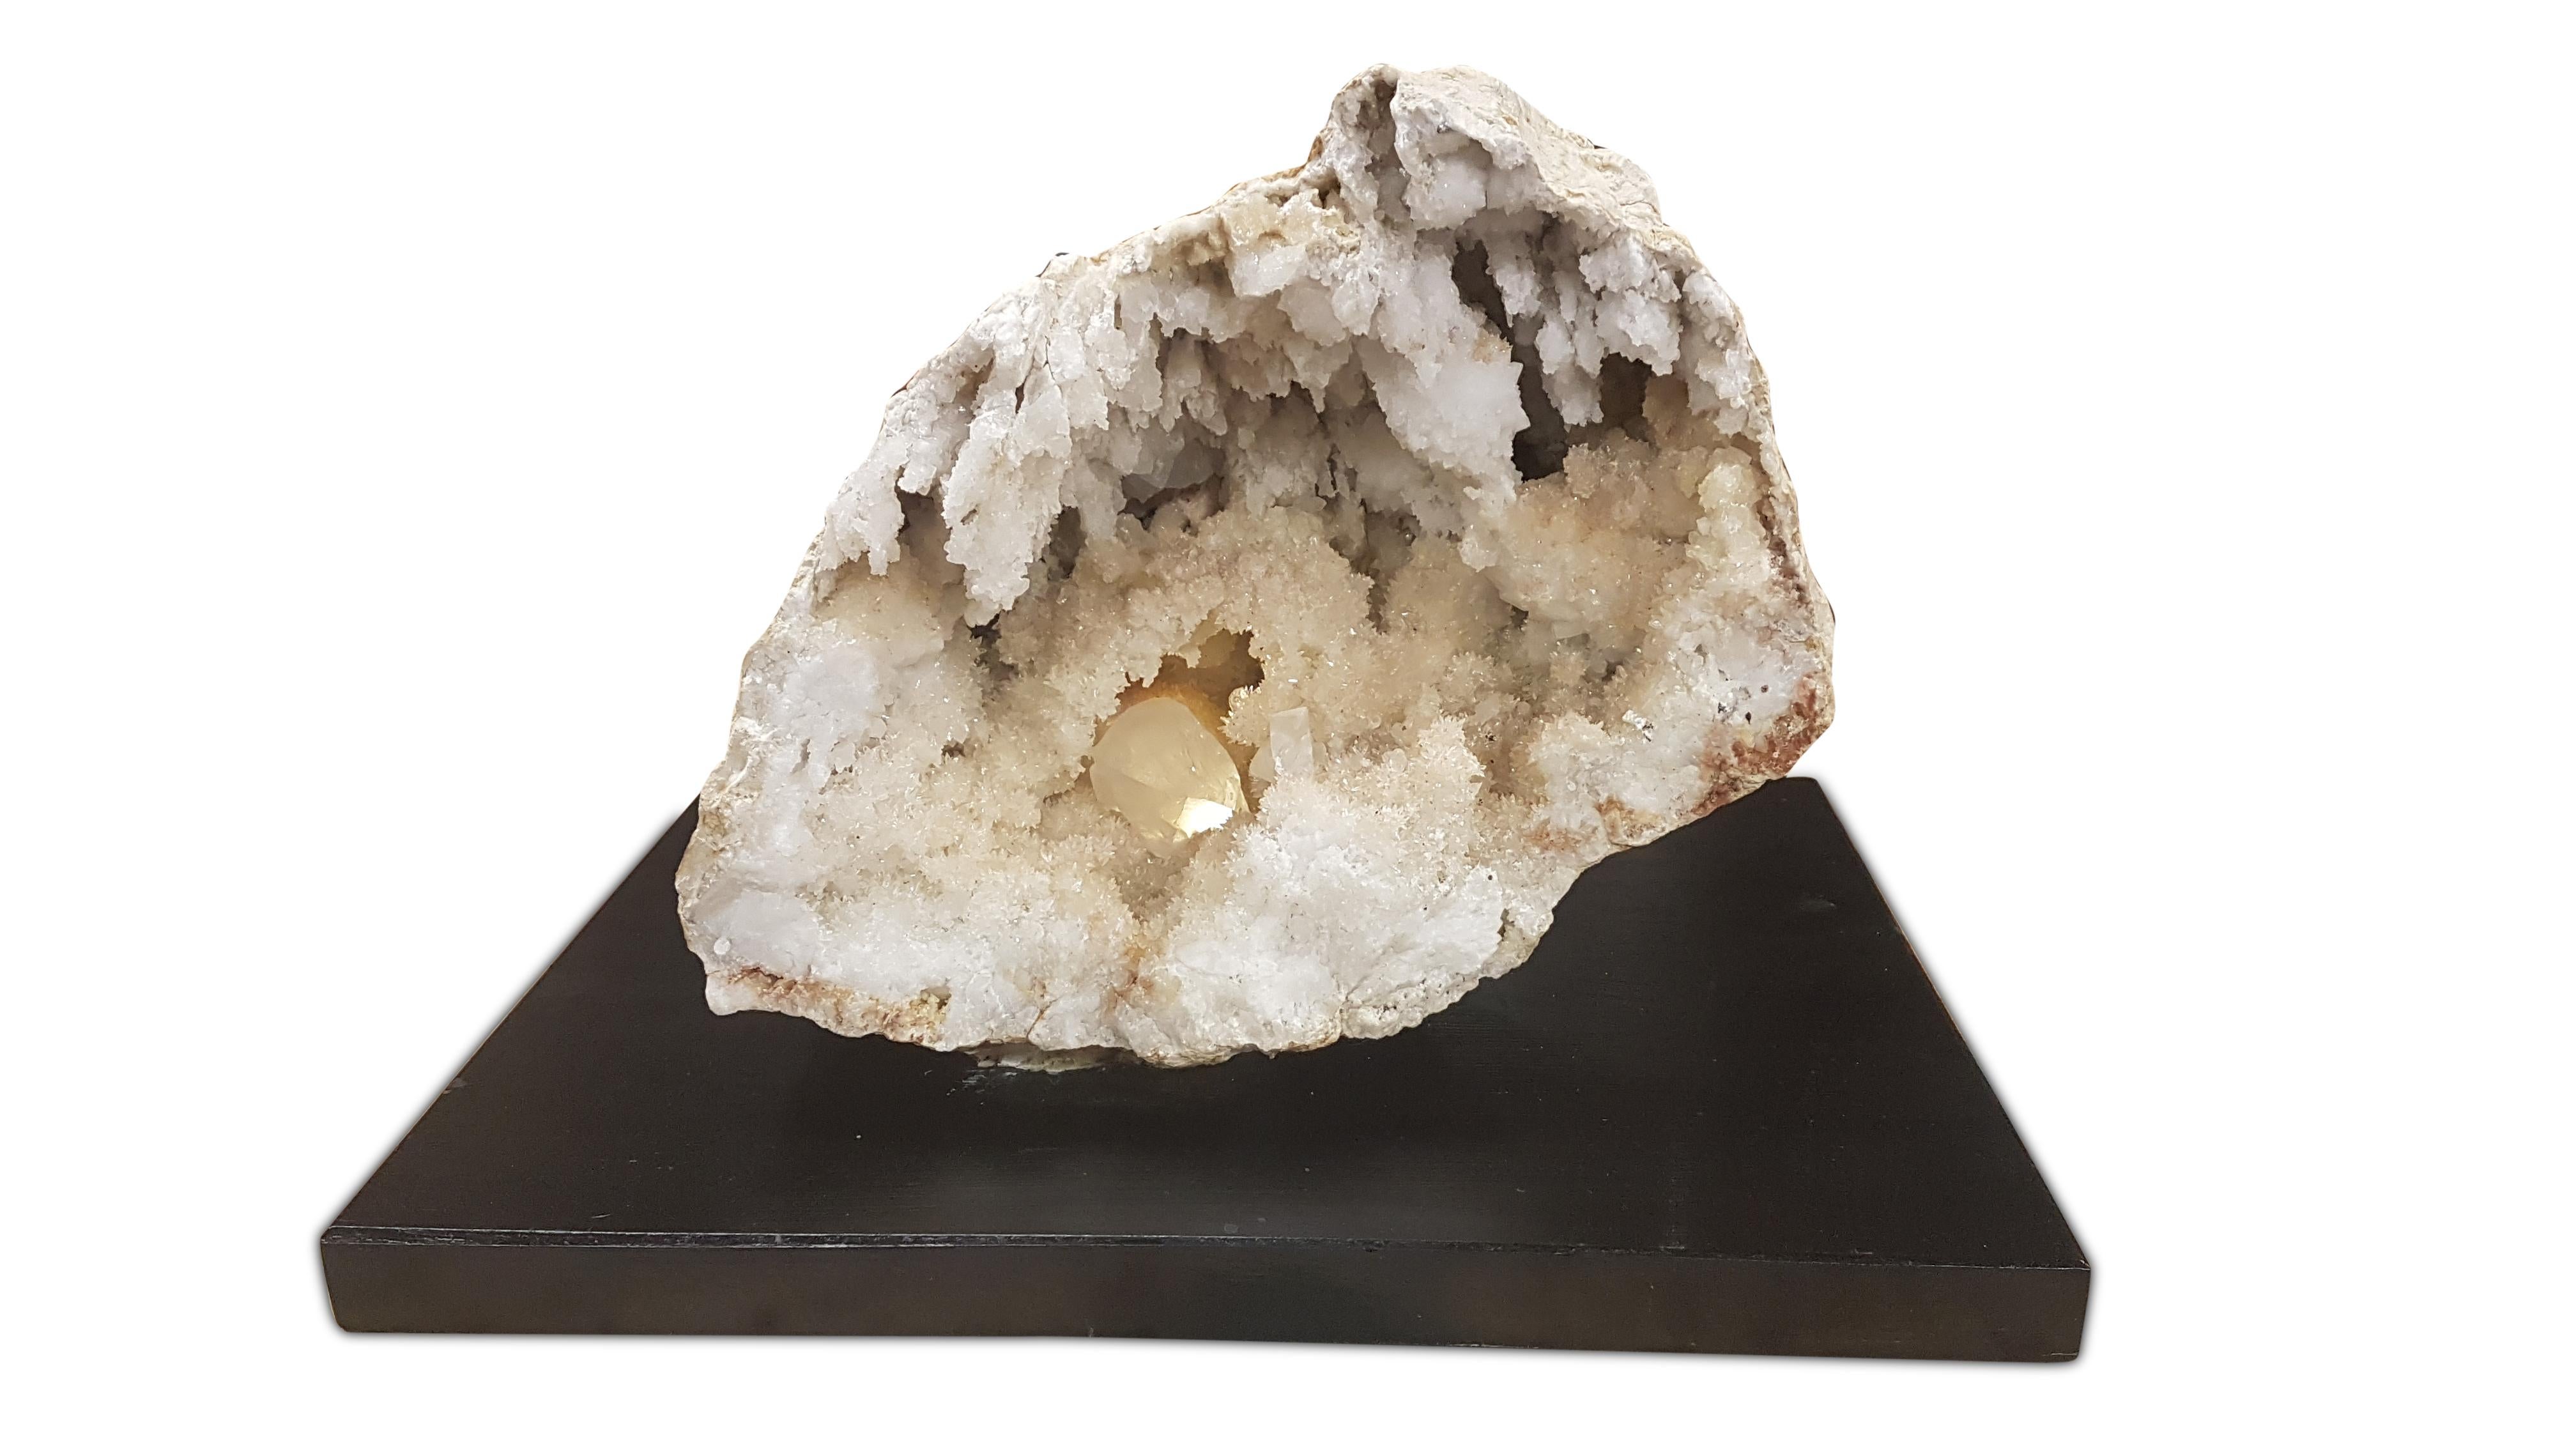 A very unusual pair of natural geodes formed in sandstone, the crystal Formations inside are quartz. These halves are two halves of one formation that has split in two. They have been attached to custom made black painted beech bases with Industrial